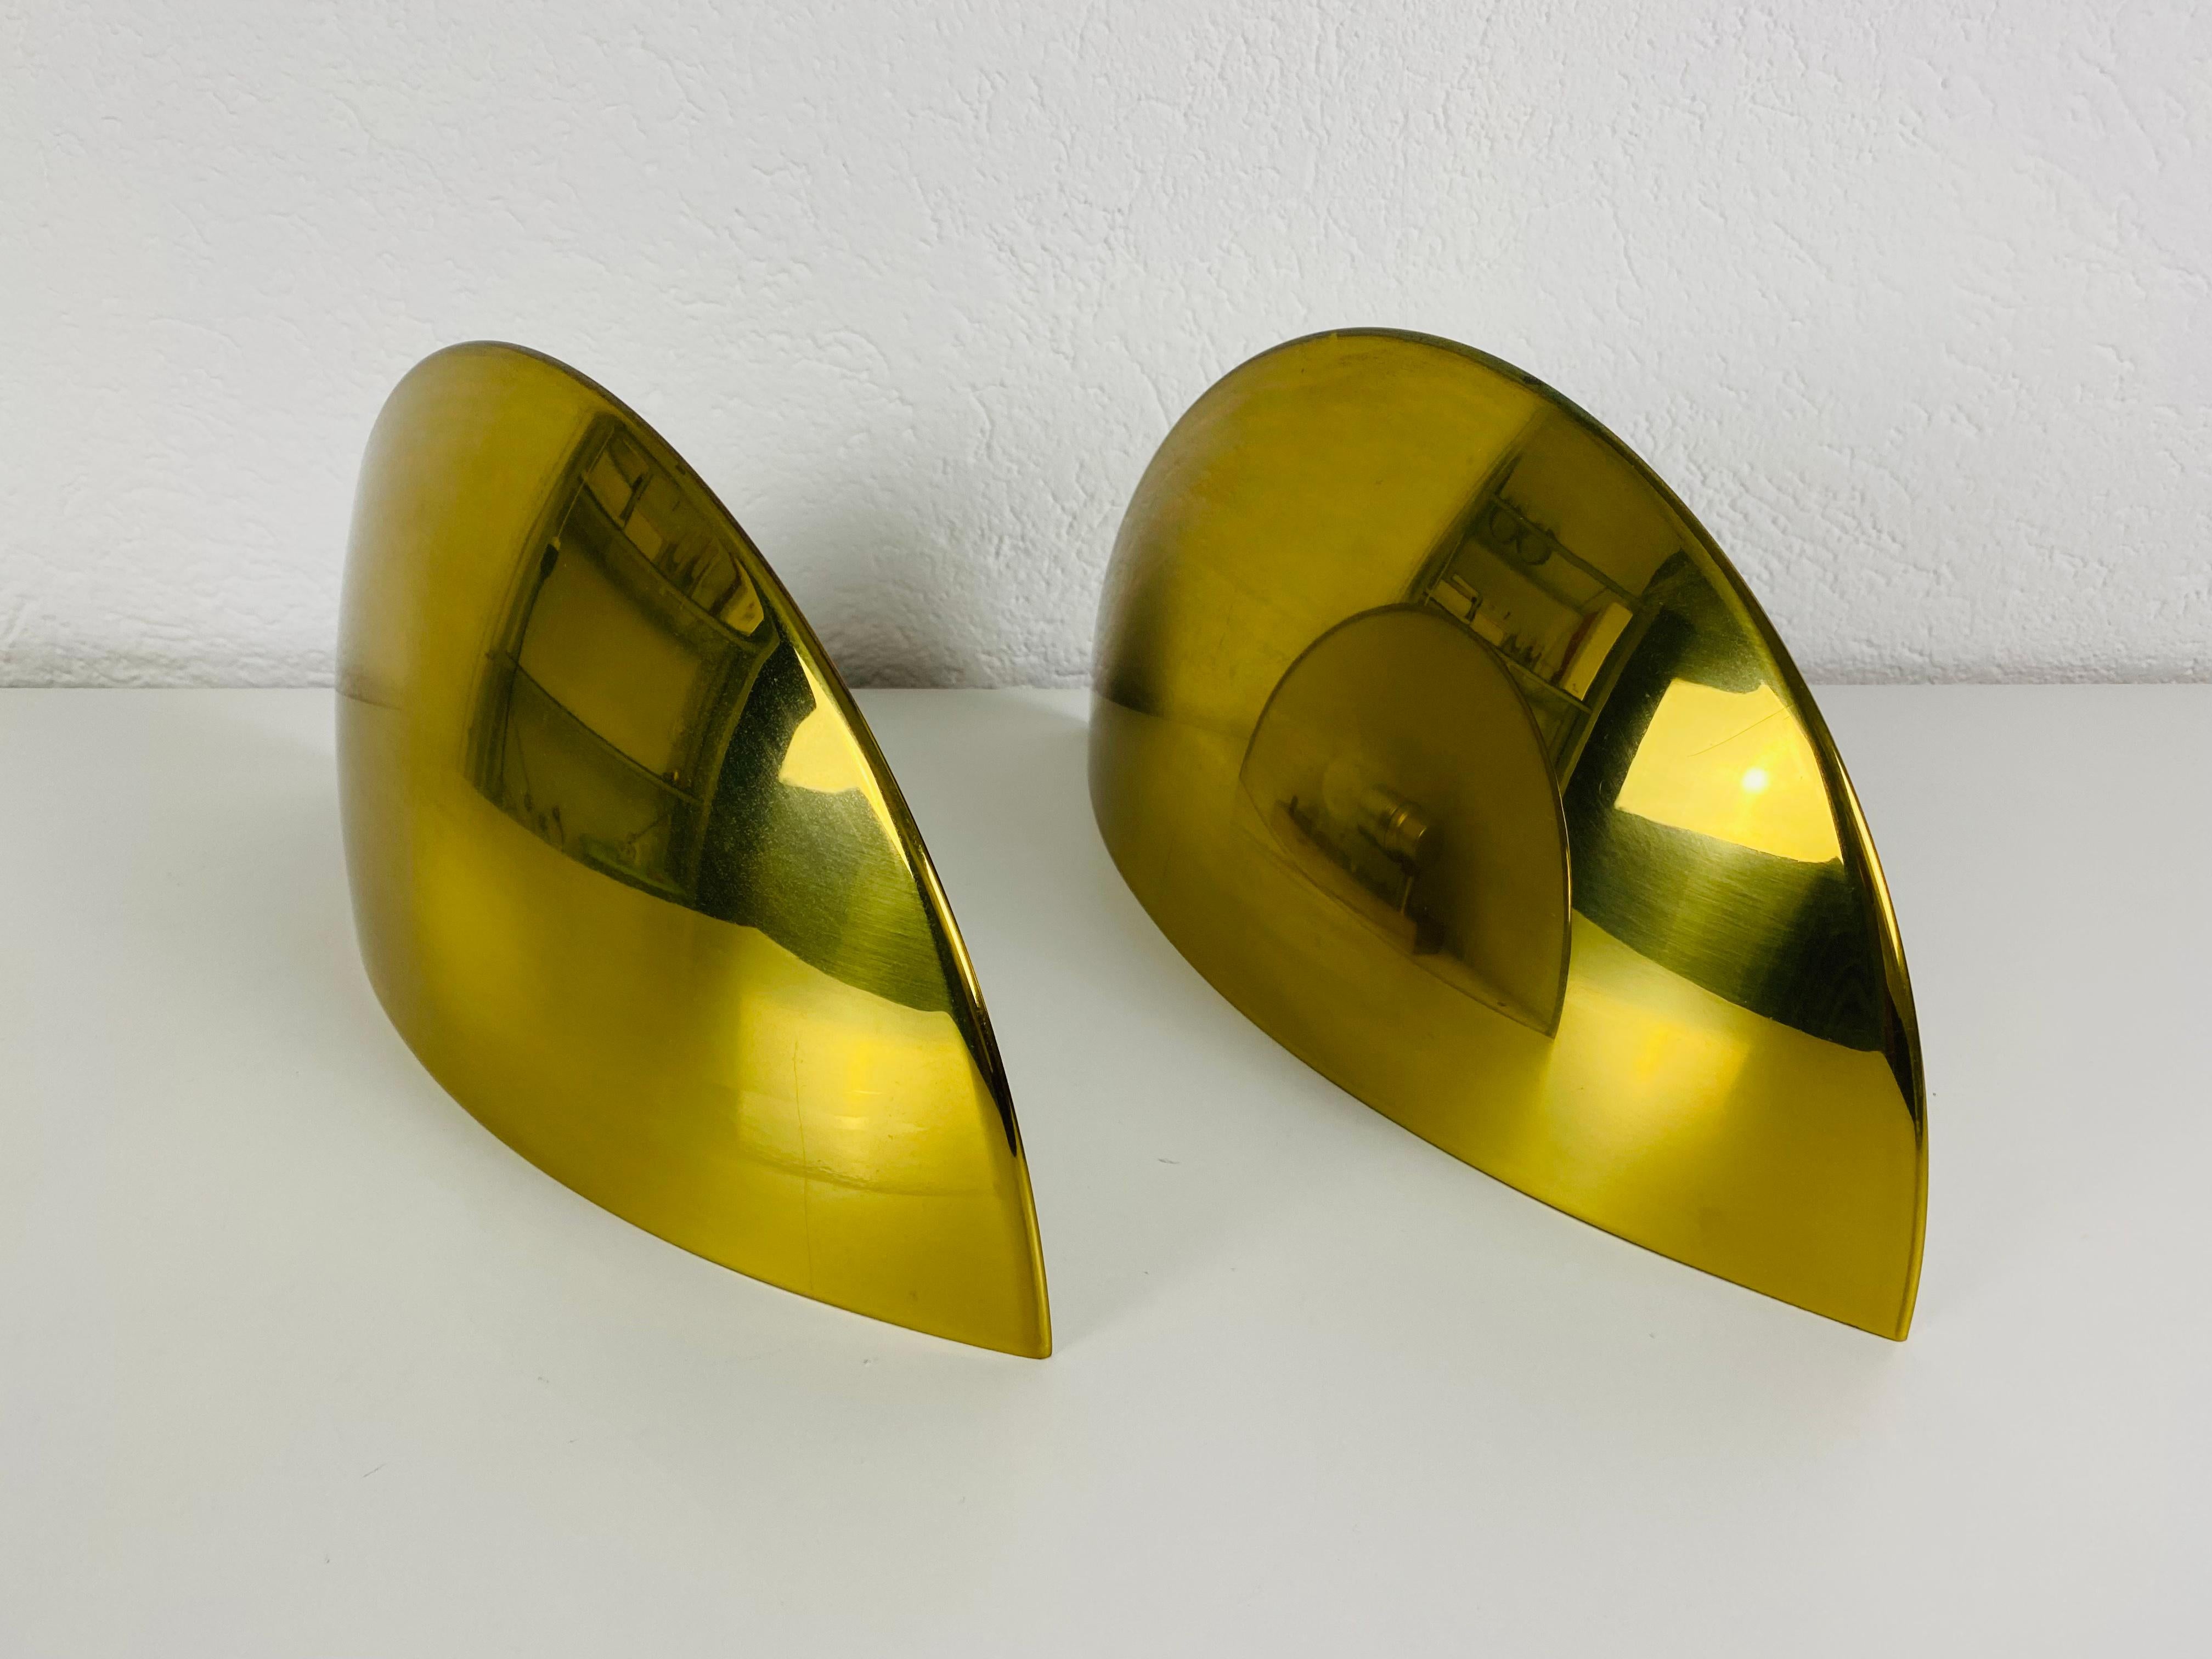 Pair of Florian Schulz Midcentury Brass Wall Lamps, 1960s For Sale 5